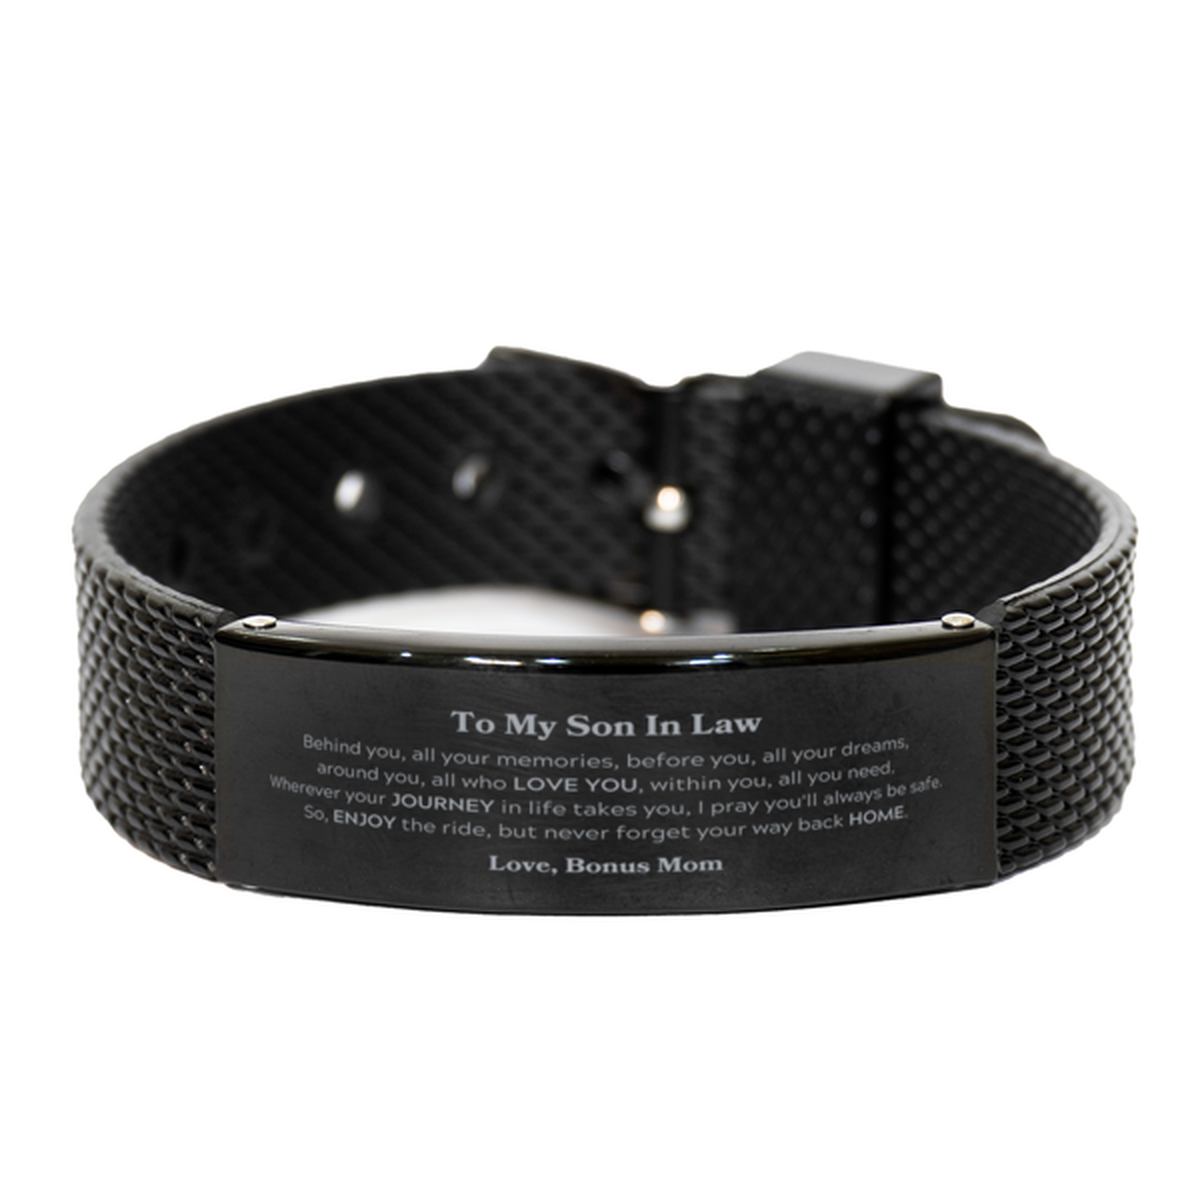 To My Son In Law Graduation Gifts from Bonus Mom, Son In Law Black Shark Mesh Bracelet Christmas Birthday Gifts for Son In Law Behind you, all your memories, before you, all your dreams. Love, Bonus Mom